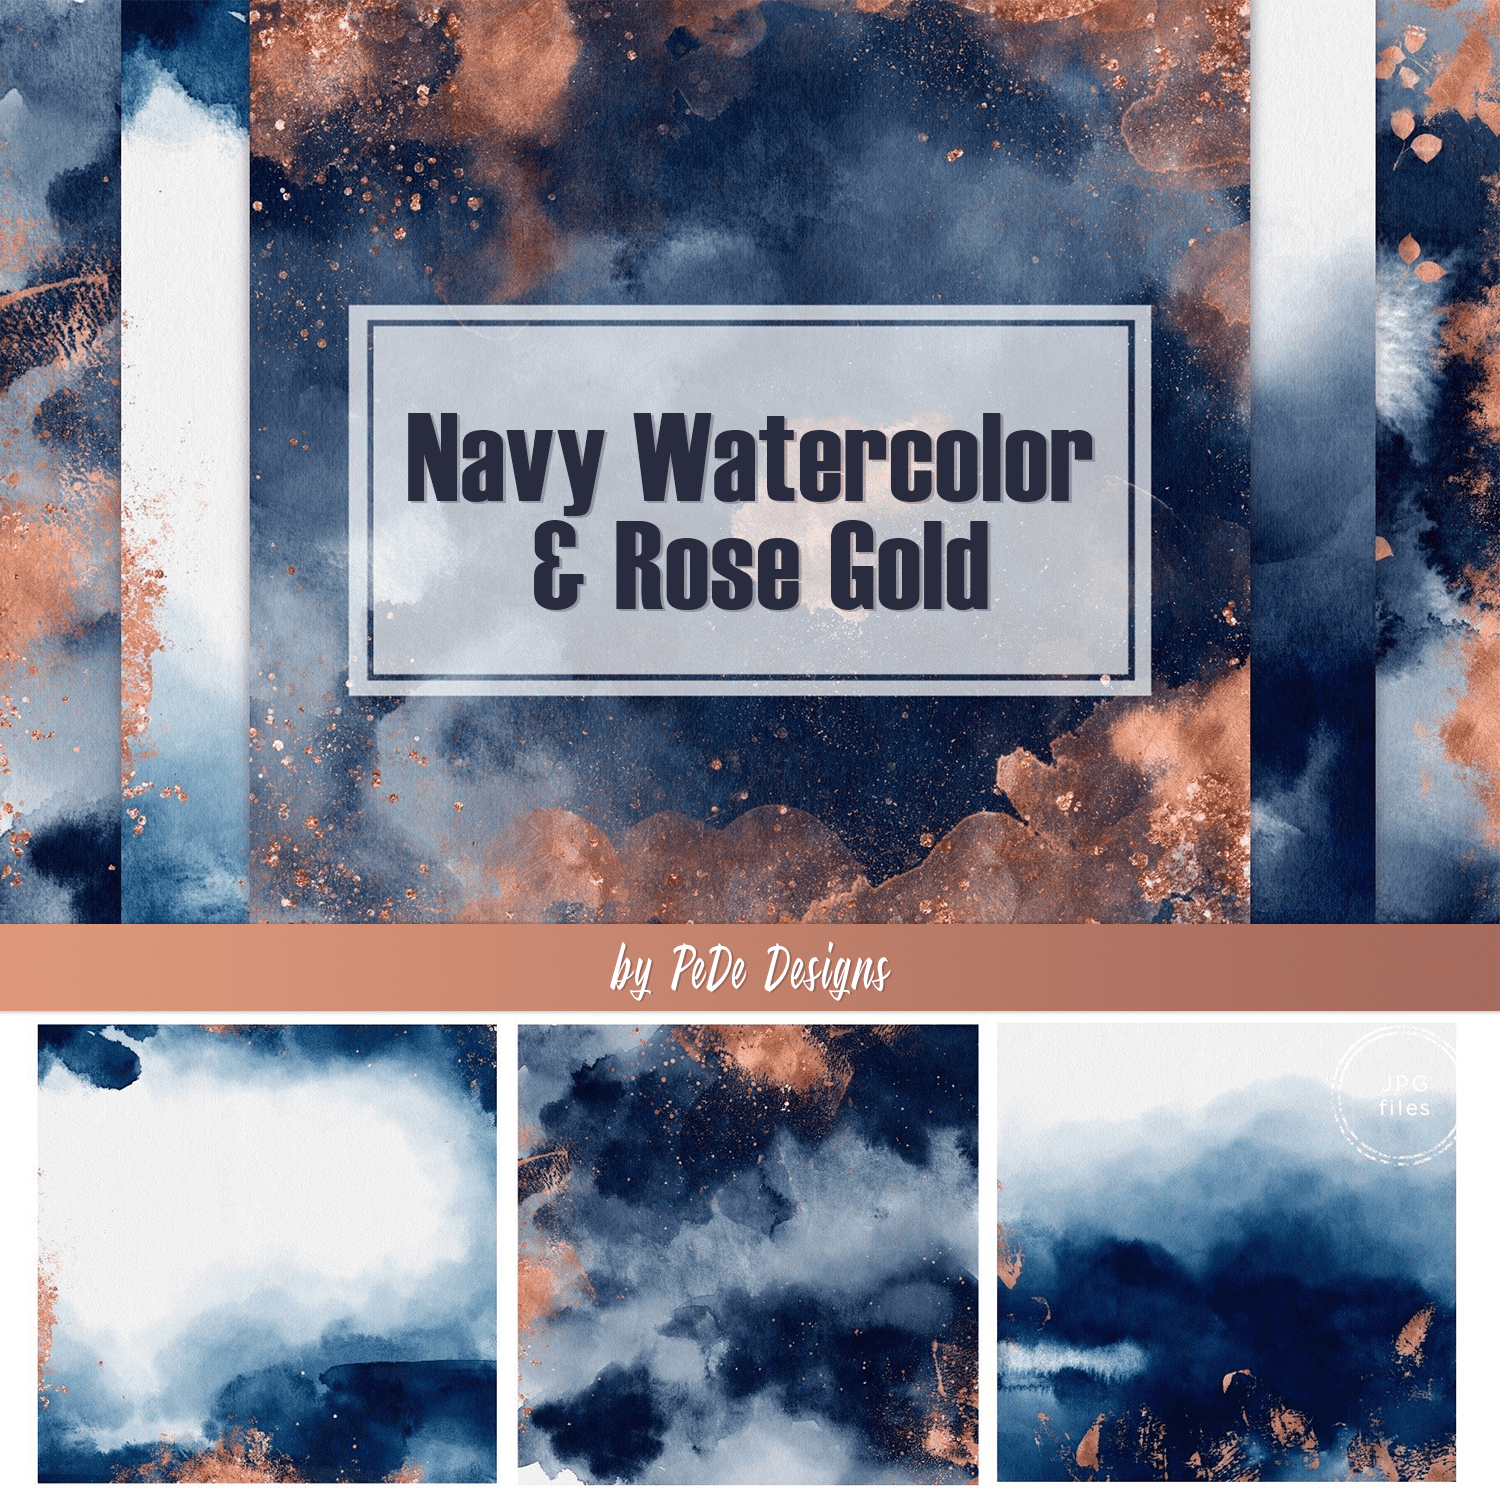 Navy Watercolor & Rose Gold cover.